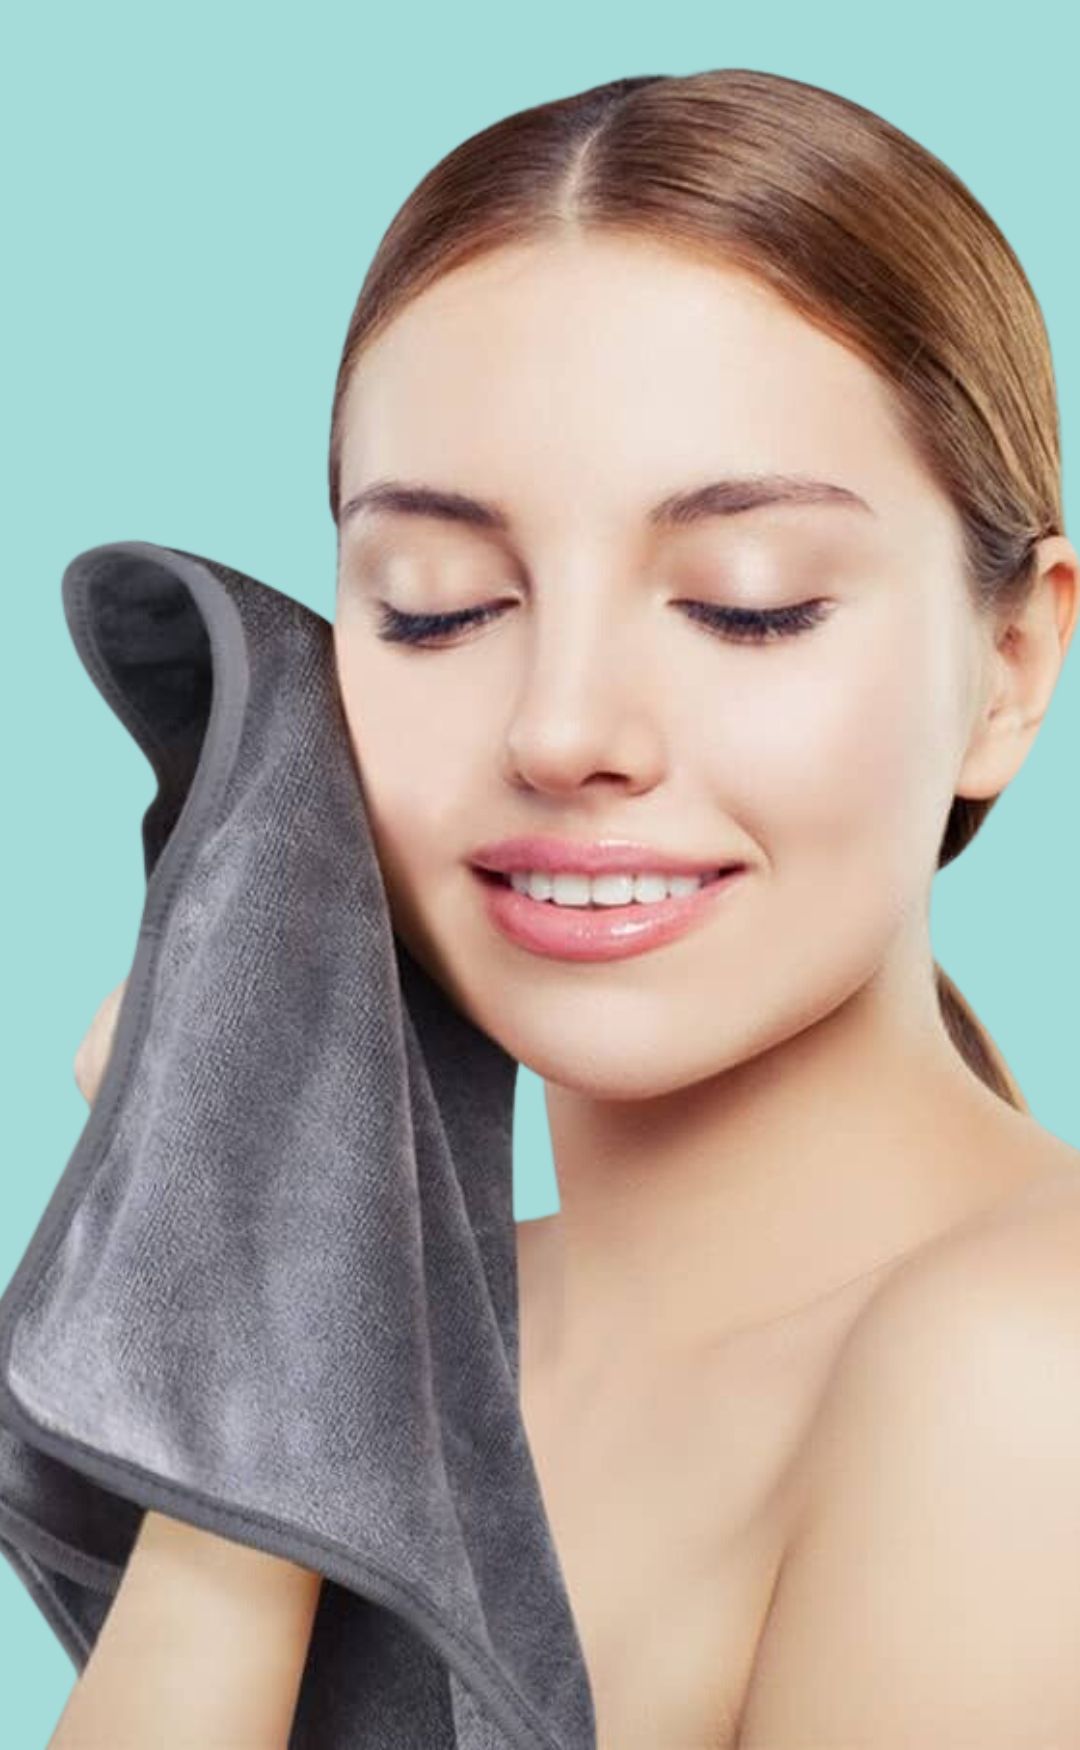 Remove waterproof mascara with Dermaworks microfibre flannel face cloths, deep cleansing and exfoliating using just water.